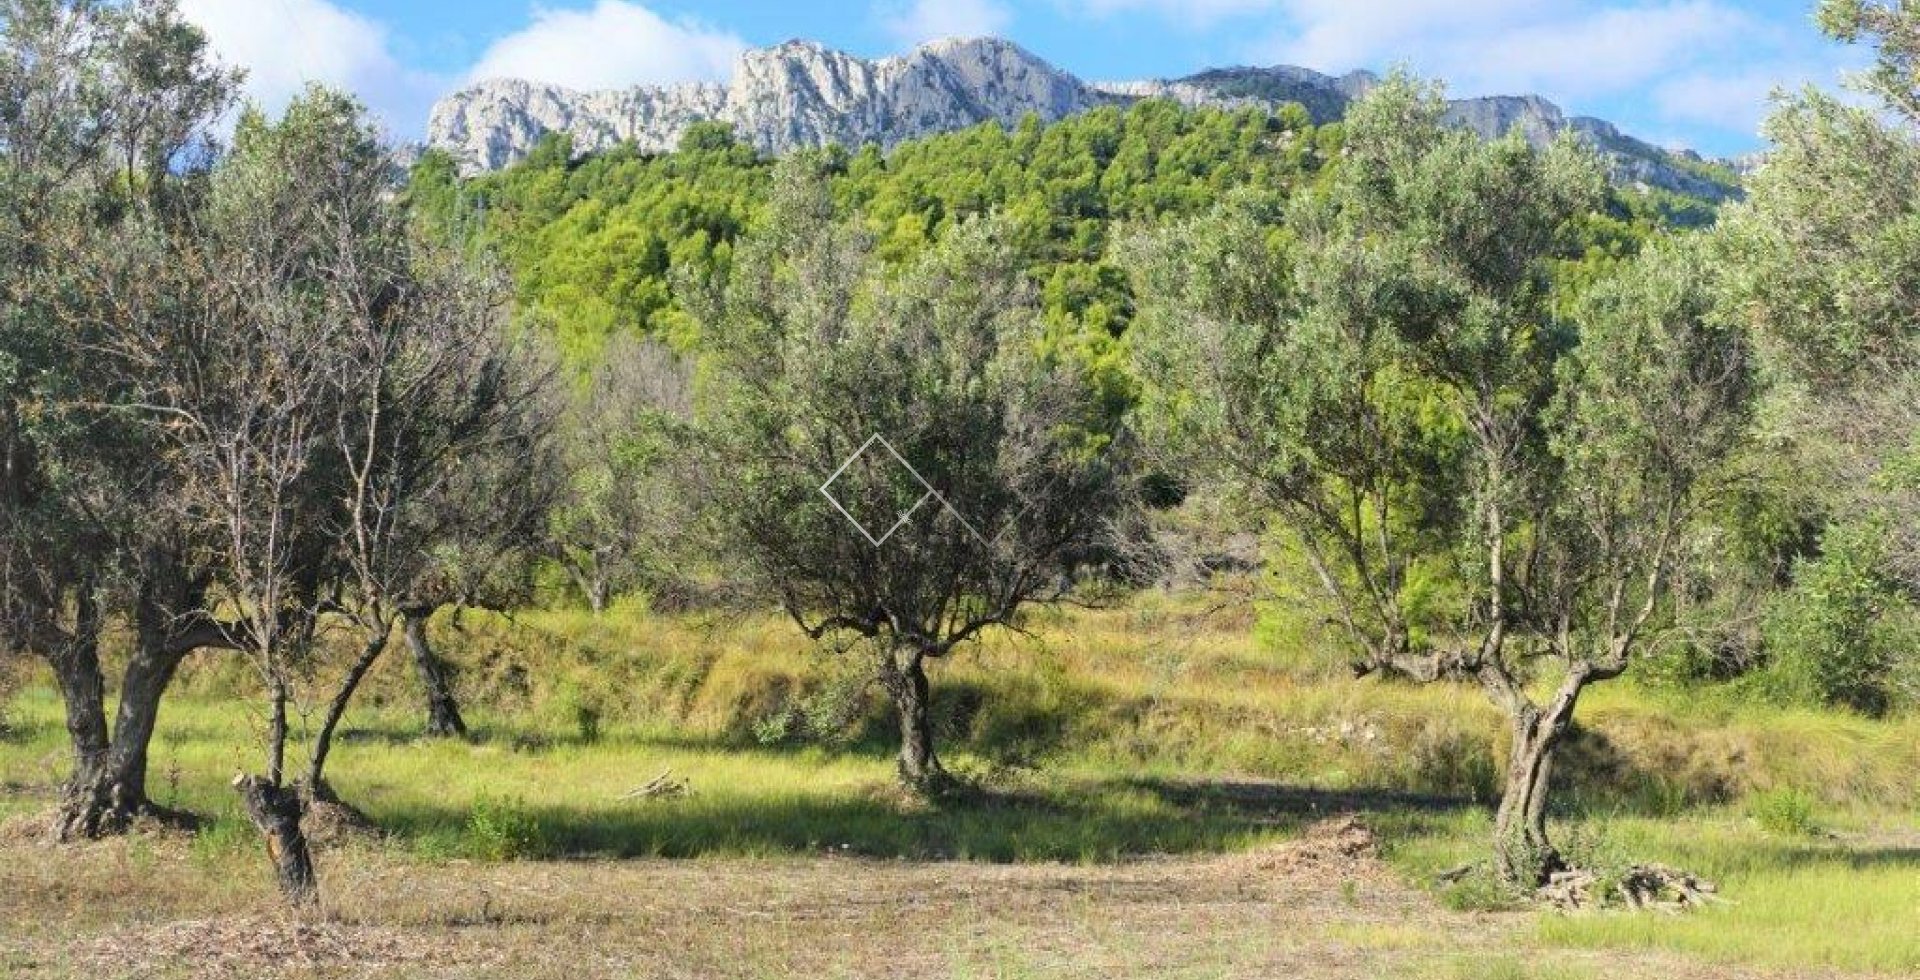  - Plots and Land - Guadalest - Partida Cherc